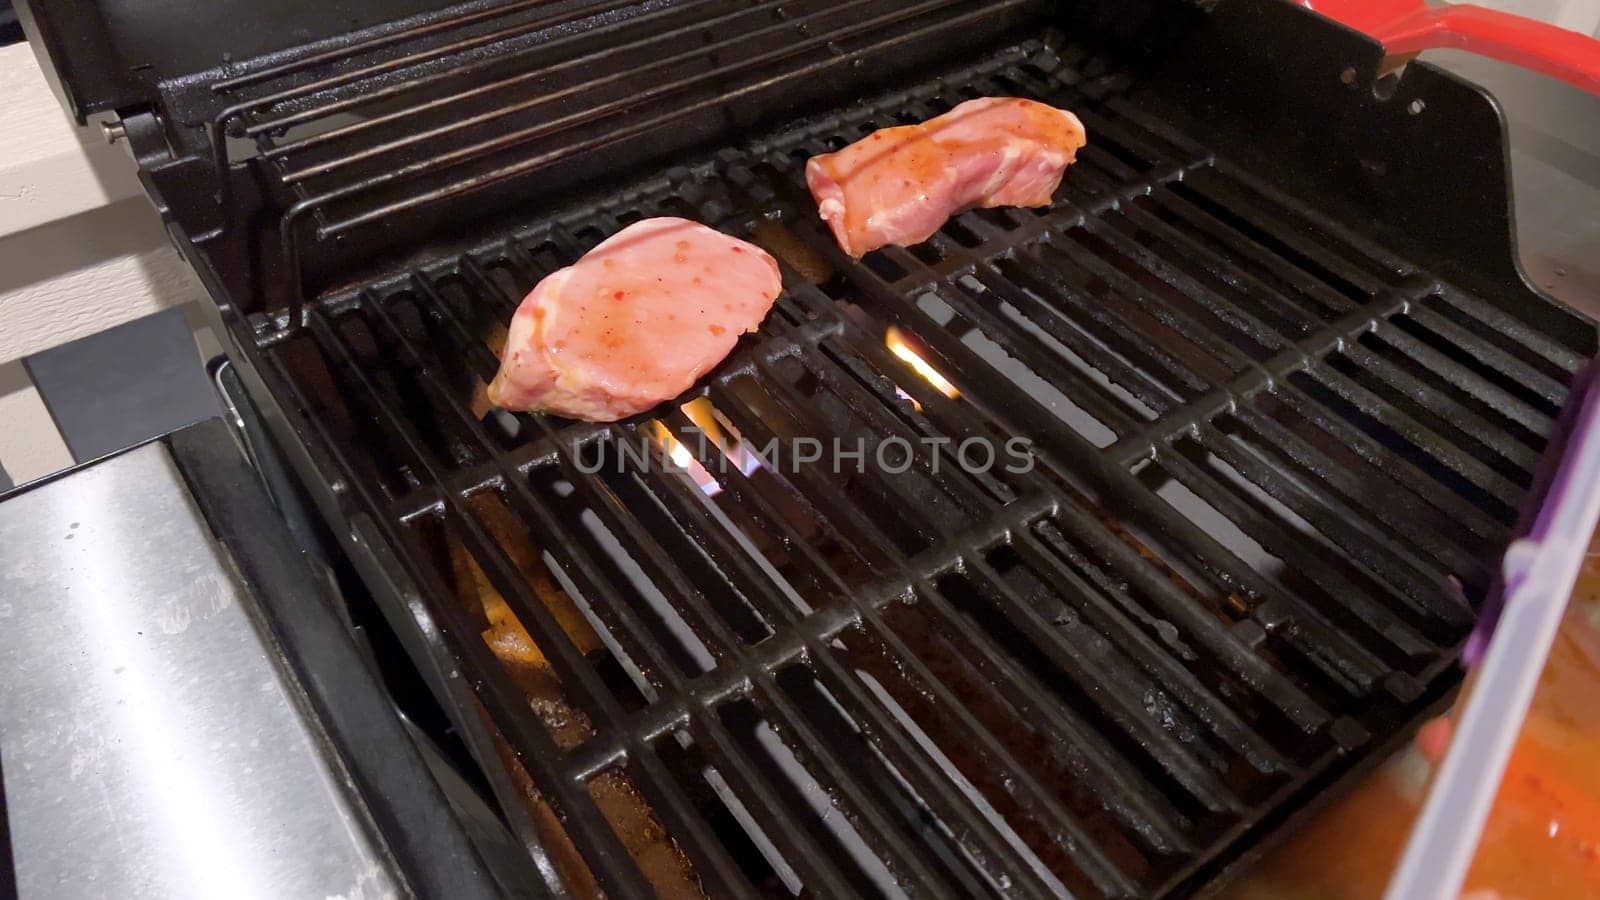 Perfectly Seasoned Pork Chops Sizzling on an Outdoor Gas Grill by arinahabich